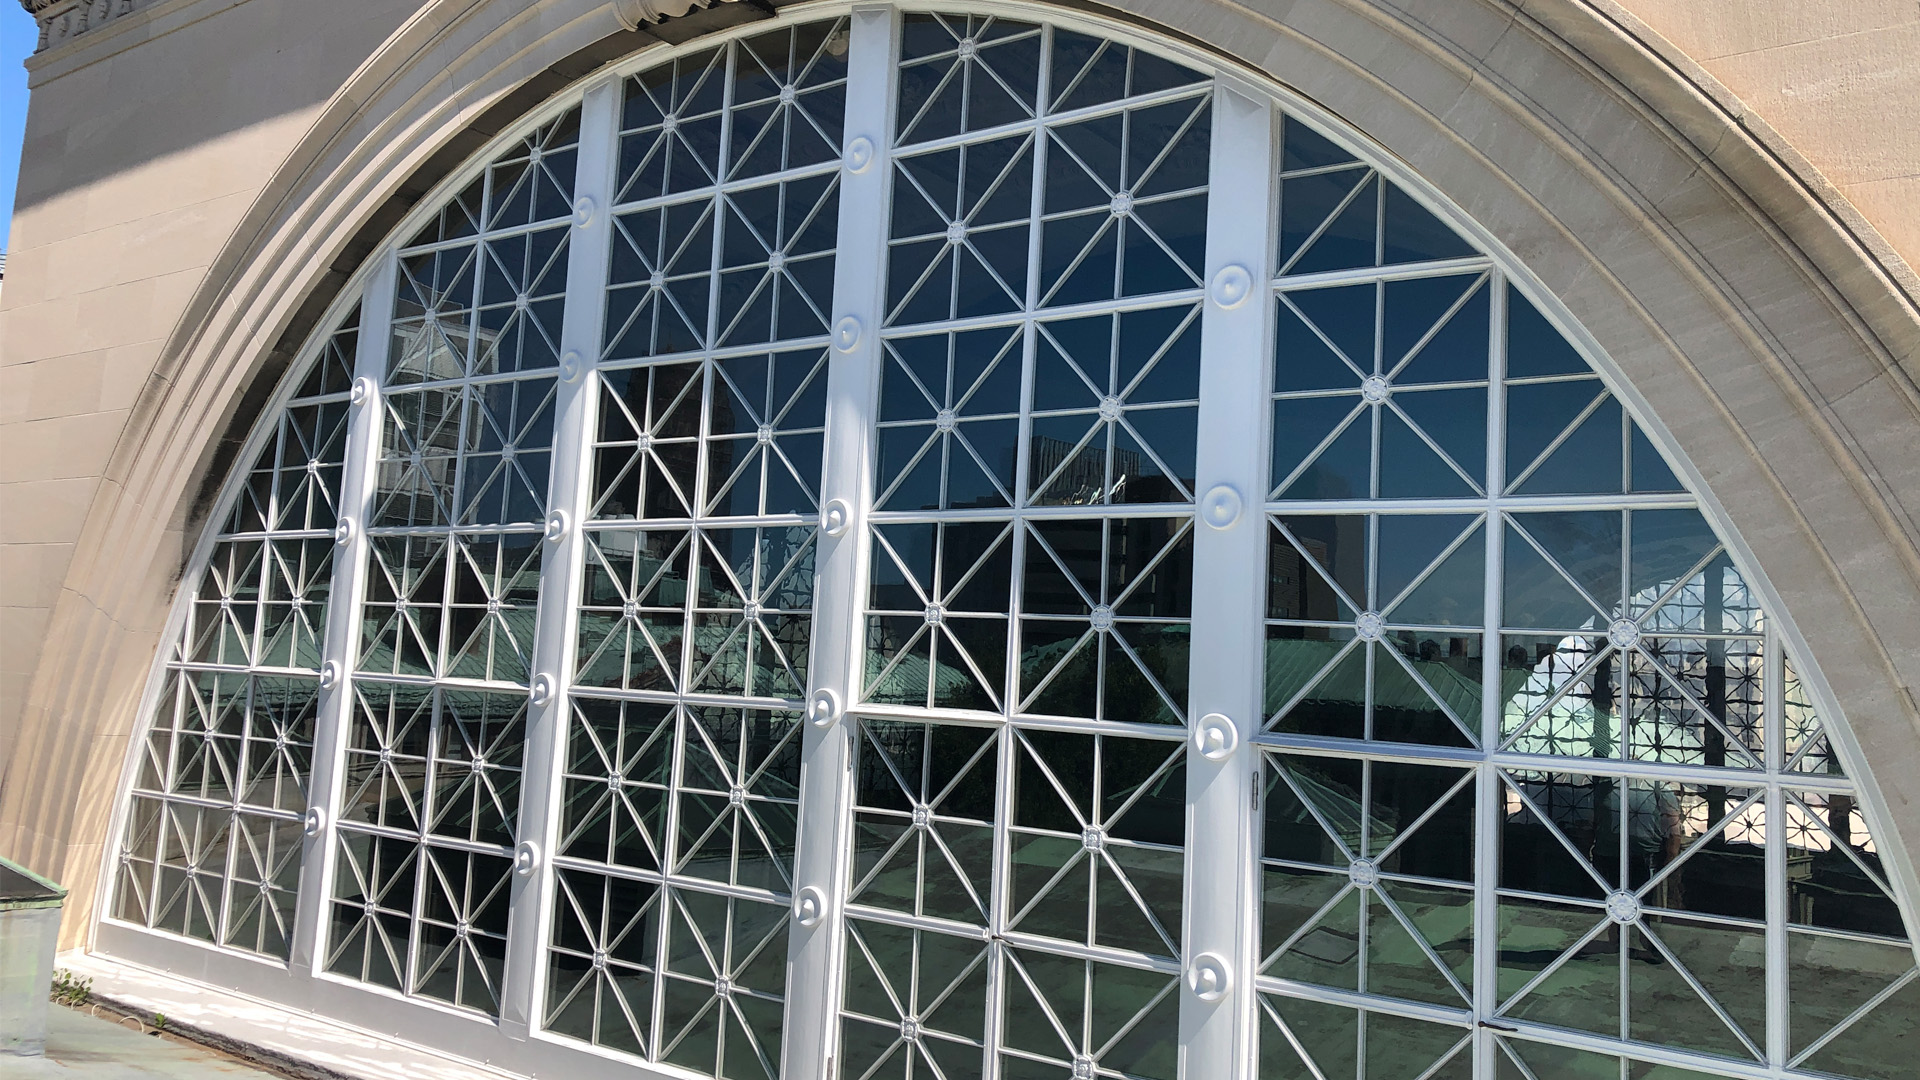 A view of the restored monumental arch window that is on the roof dome of Low Library.